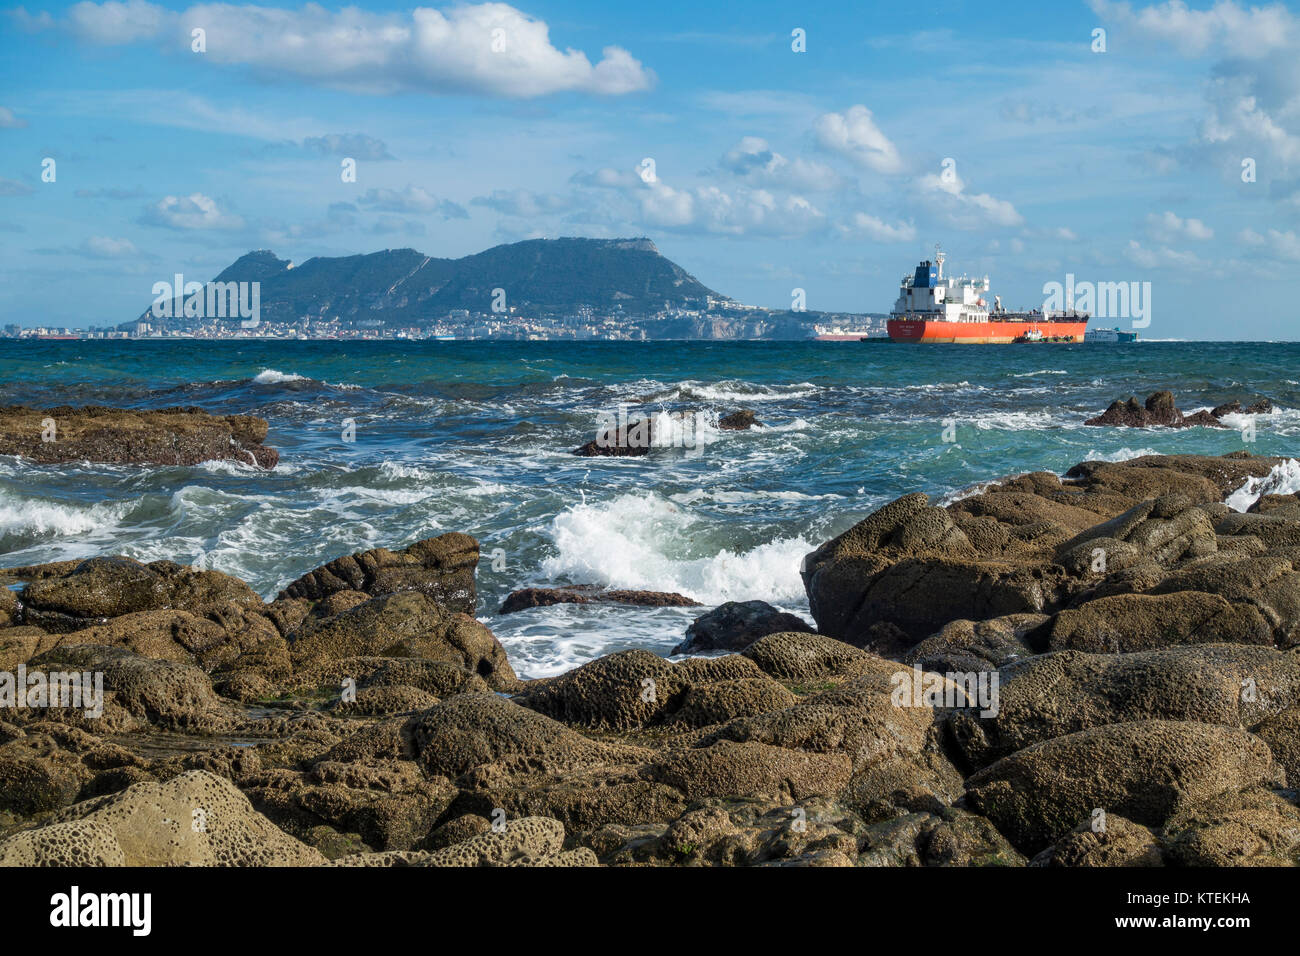 Strait of Gibraltar, with the Western face of the rock of Gibraltar and cargo ships, from Algeciras, Spain. Stock Photo